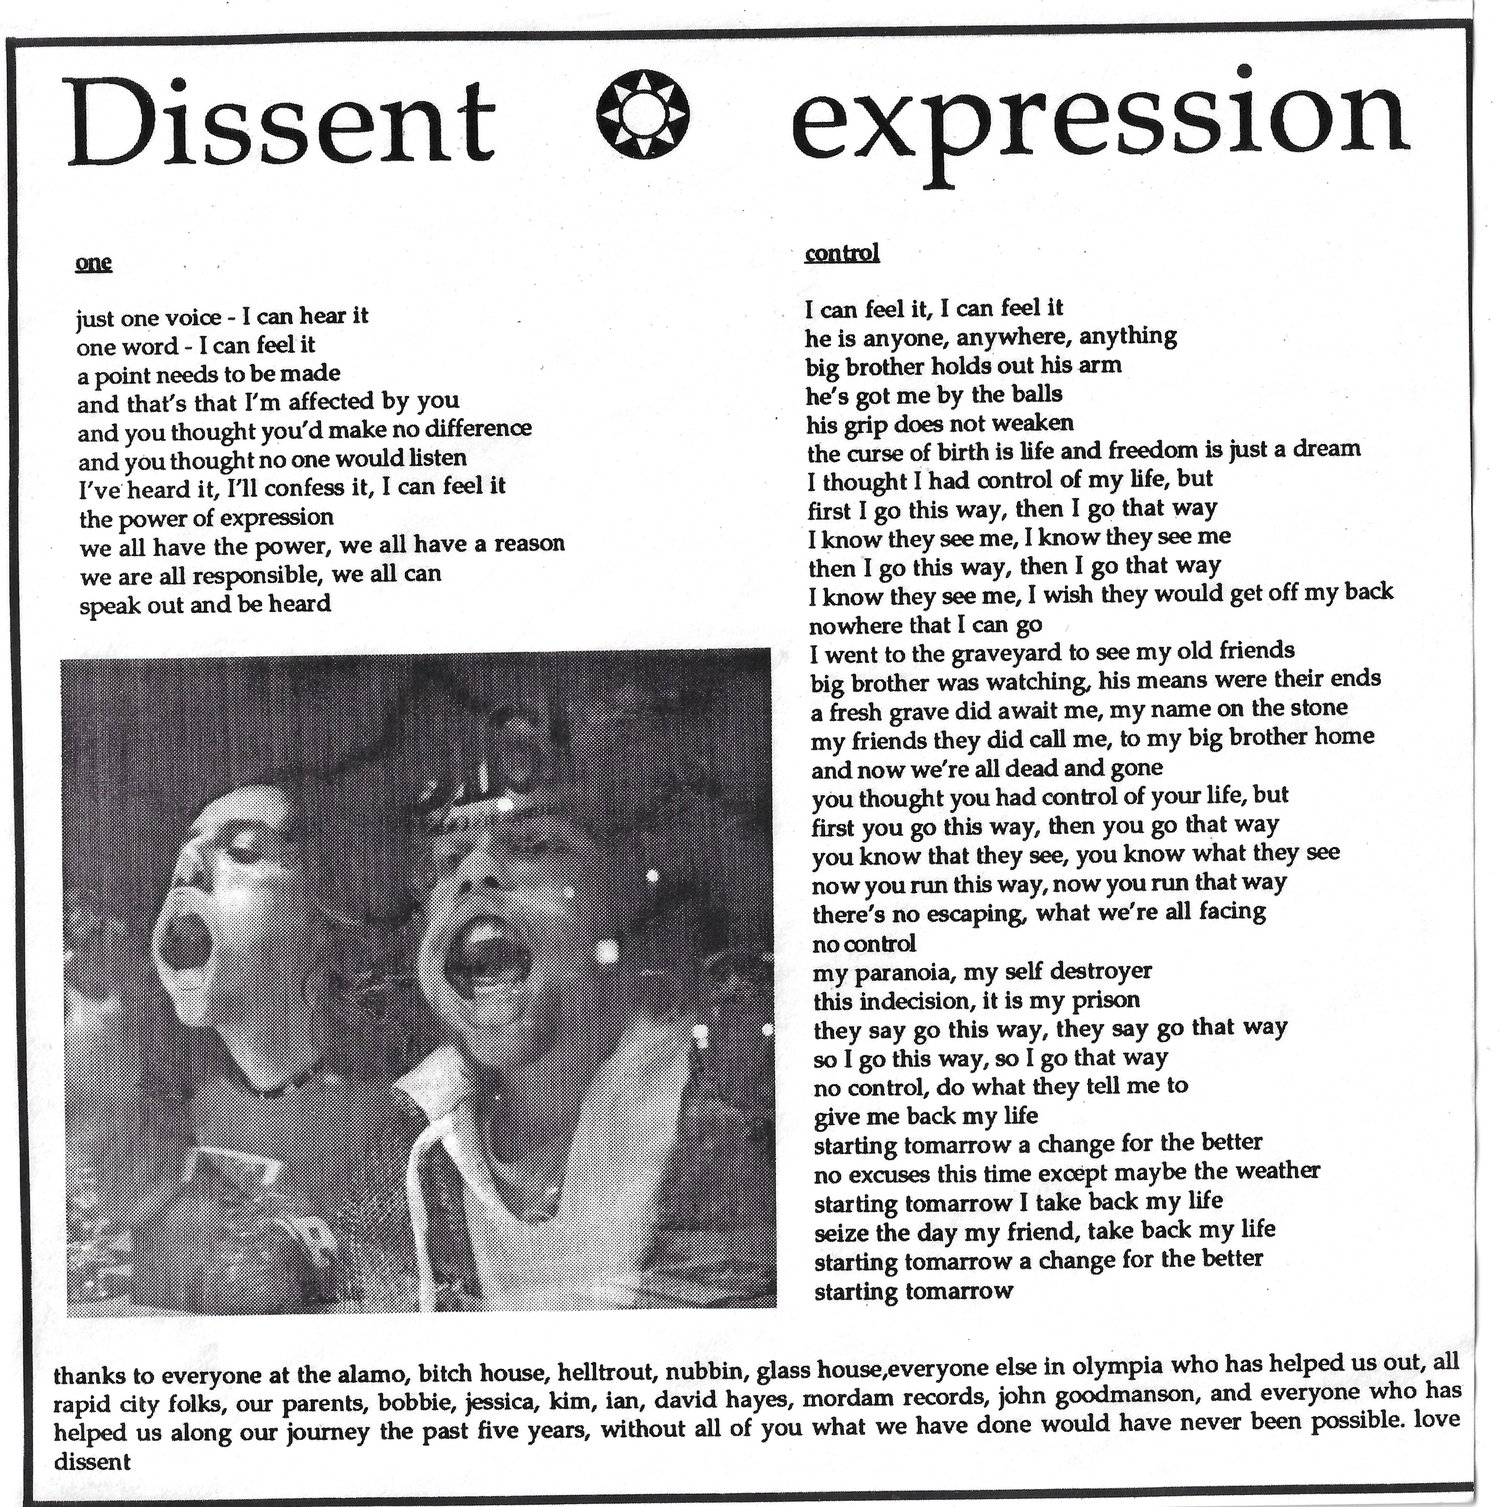 Image of Dissent - Expression 7" EP